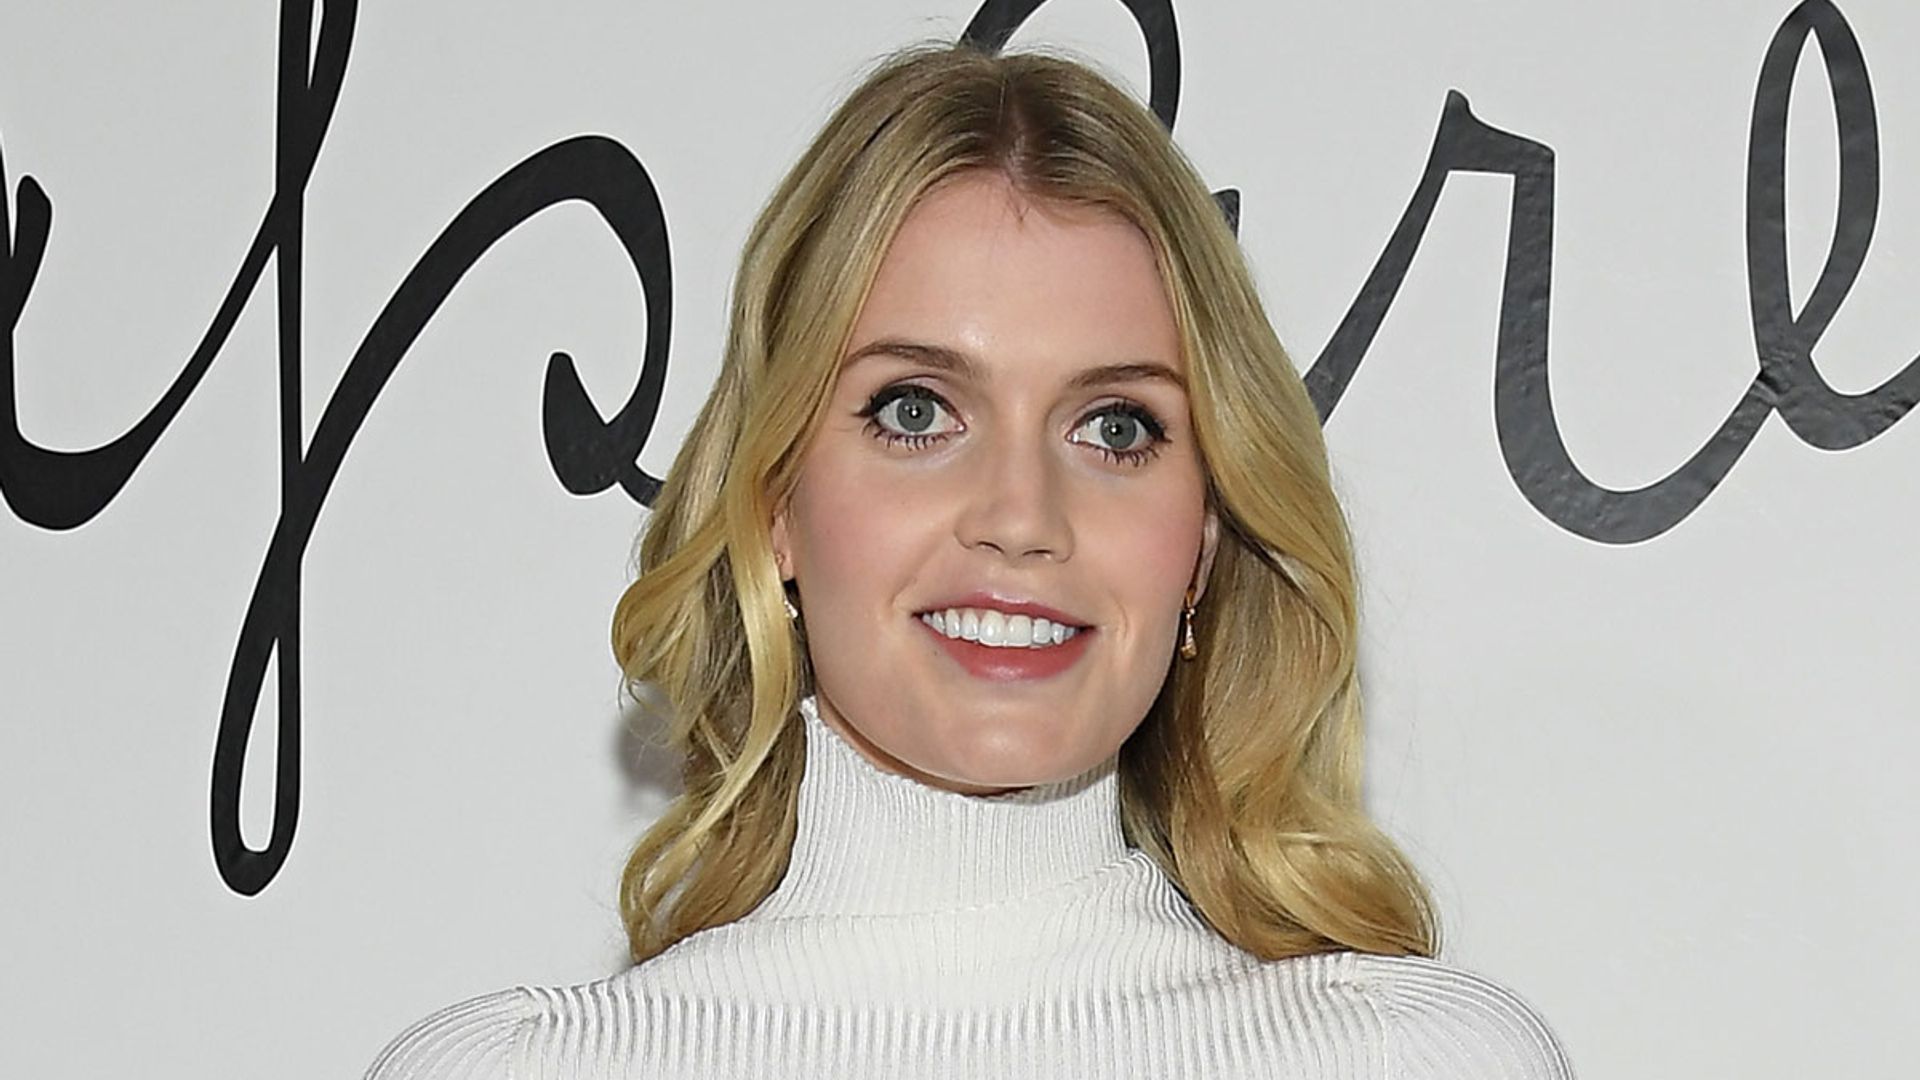 The big change Princess Diana's niece Lady Kitty Spencer is making ahead of wedding to Michael Lewis